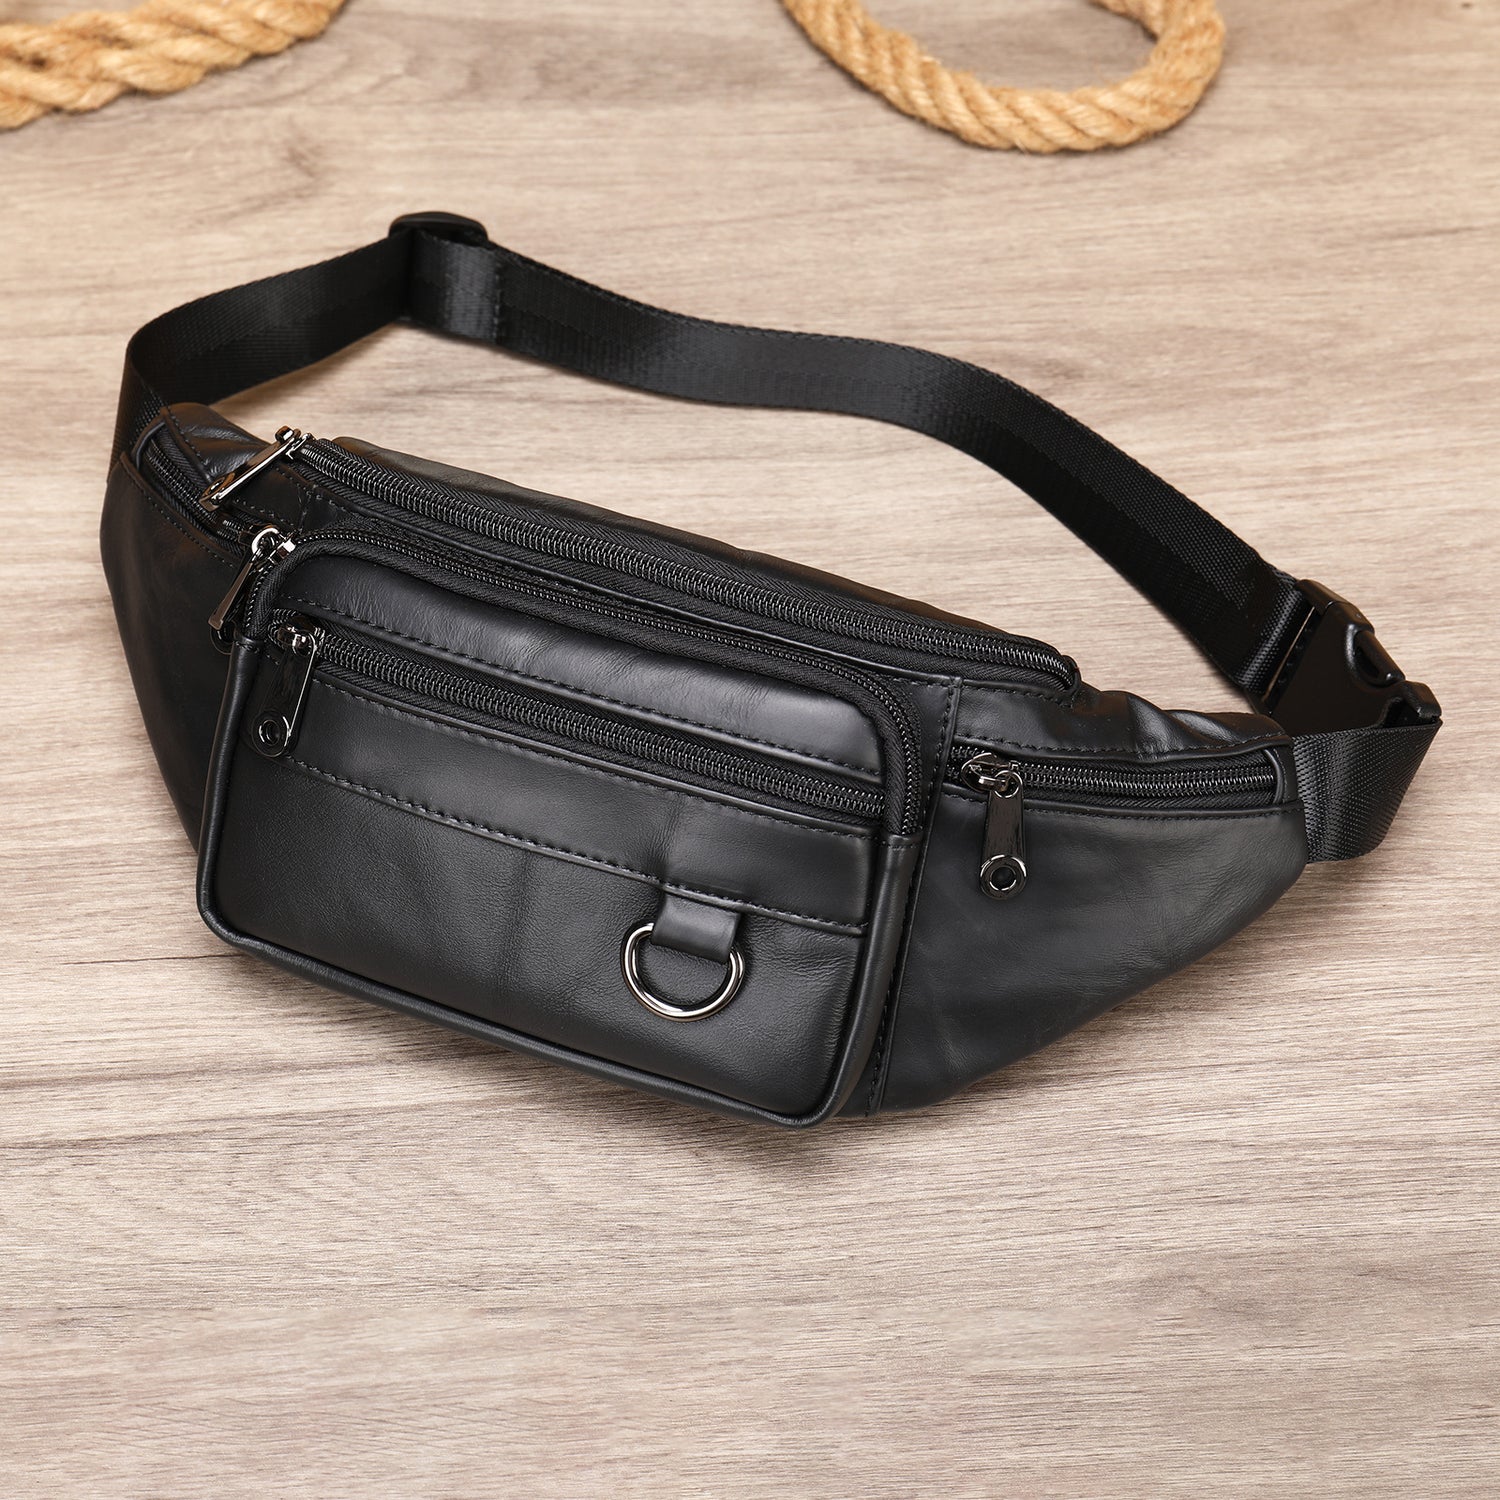 Leather Multifunctional Chest Bag Crossbody